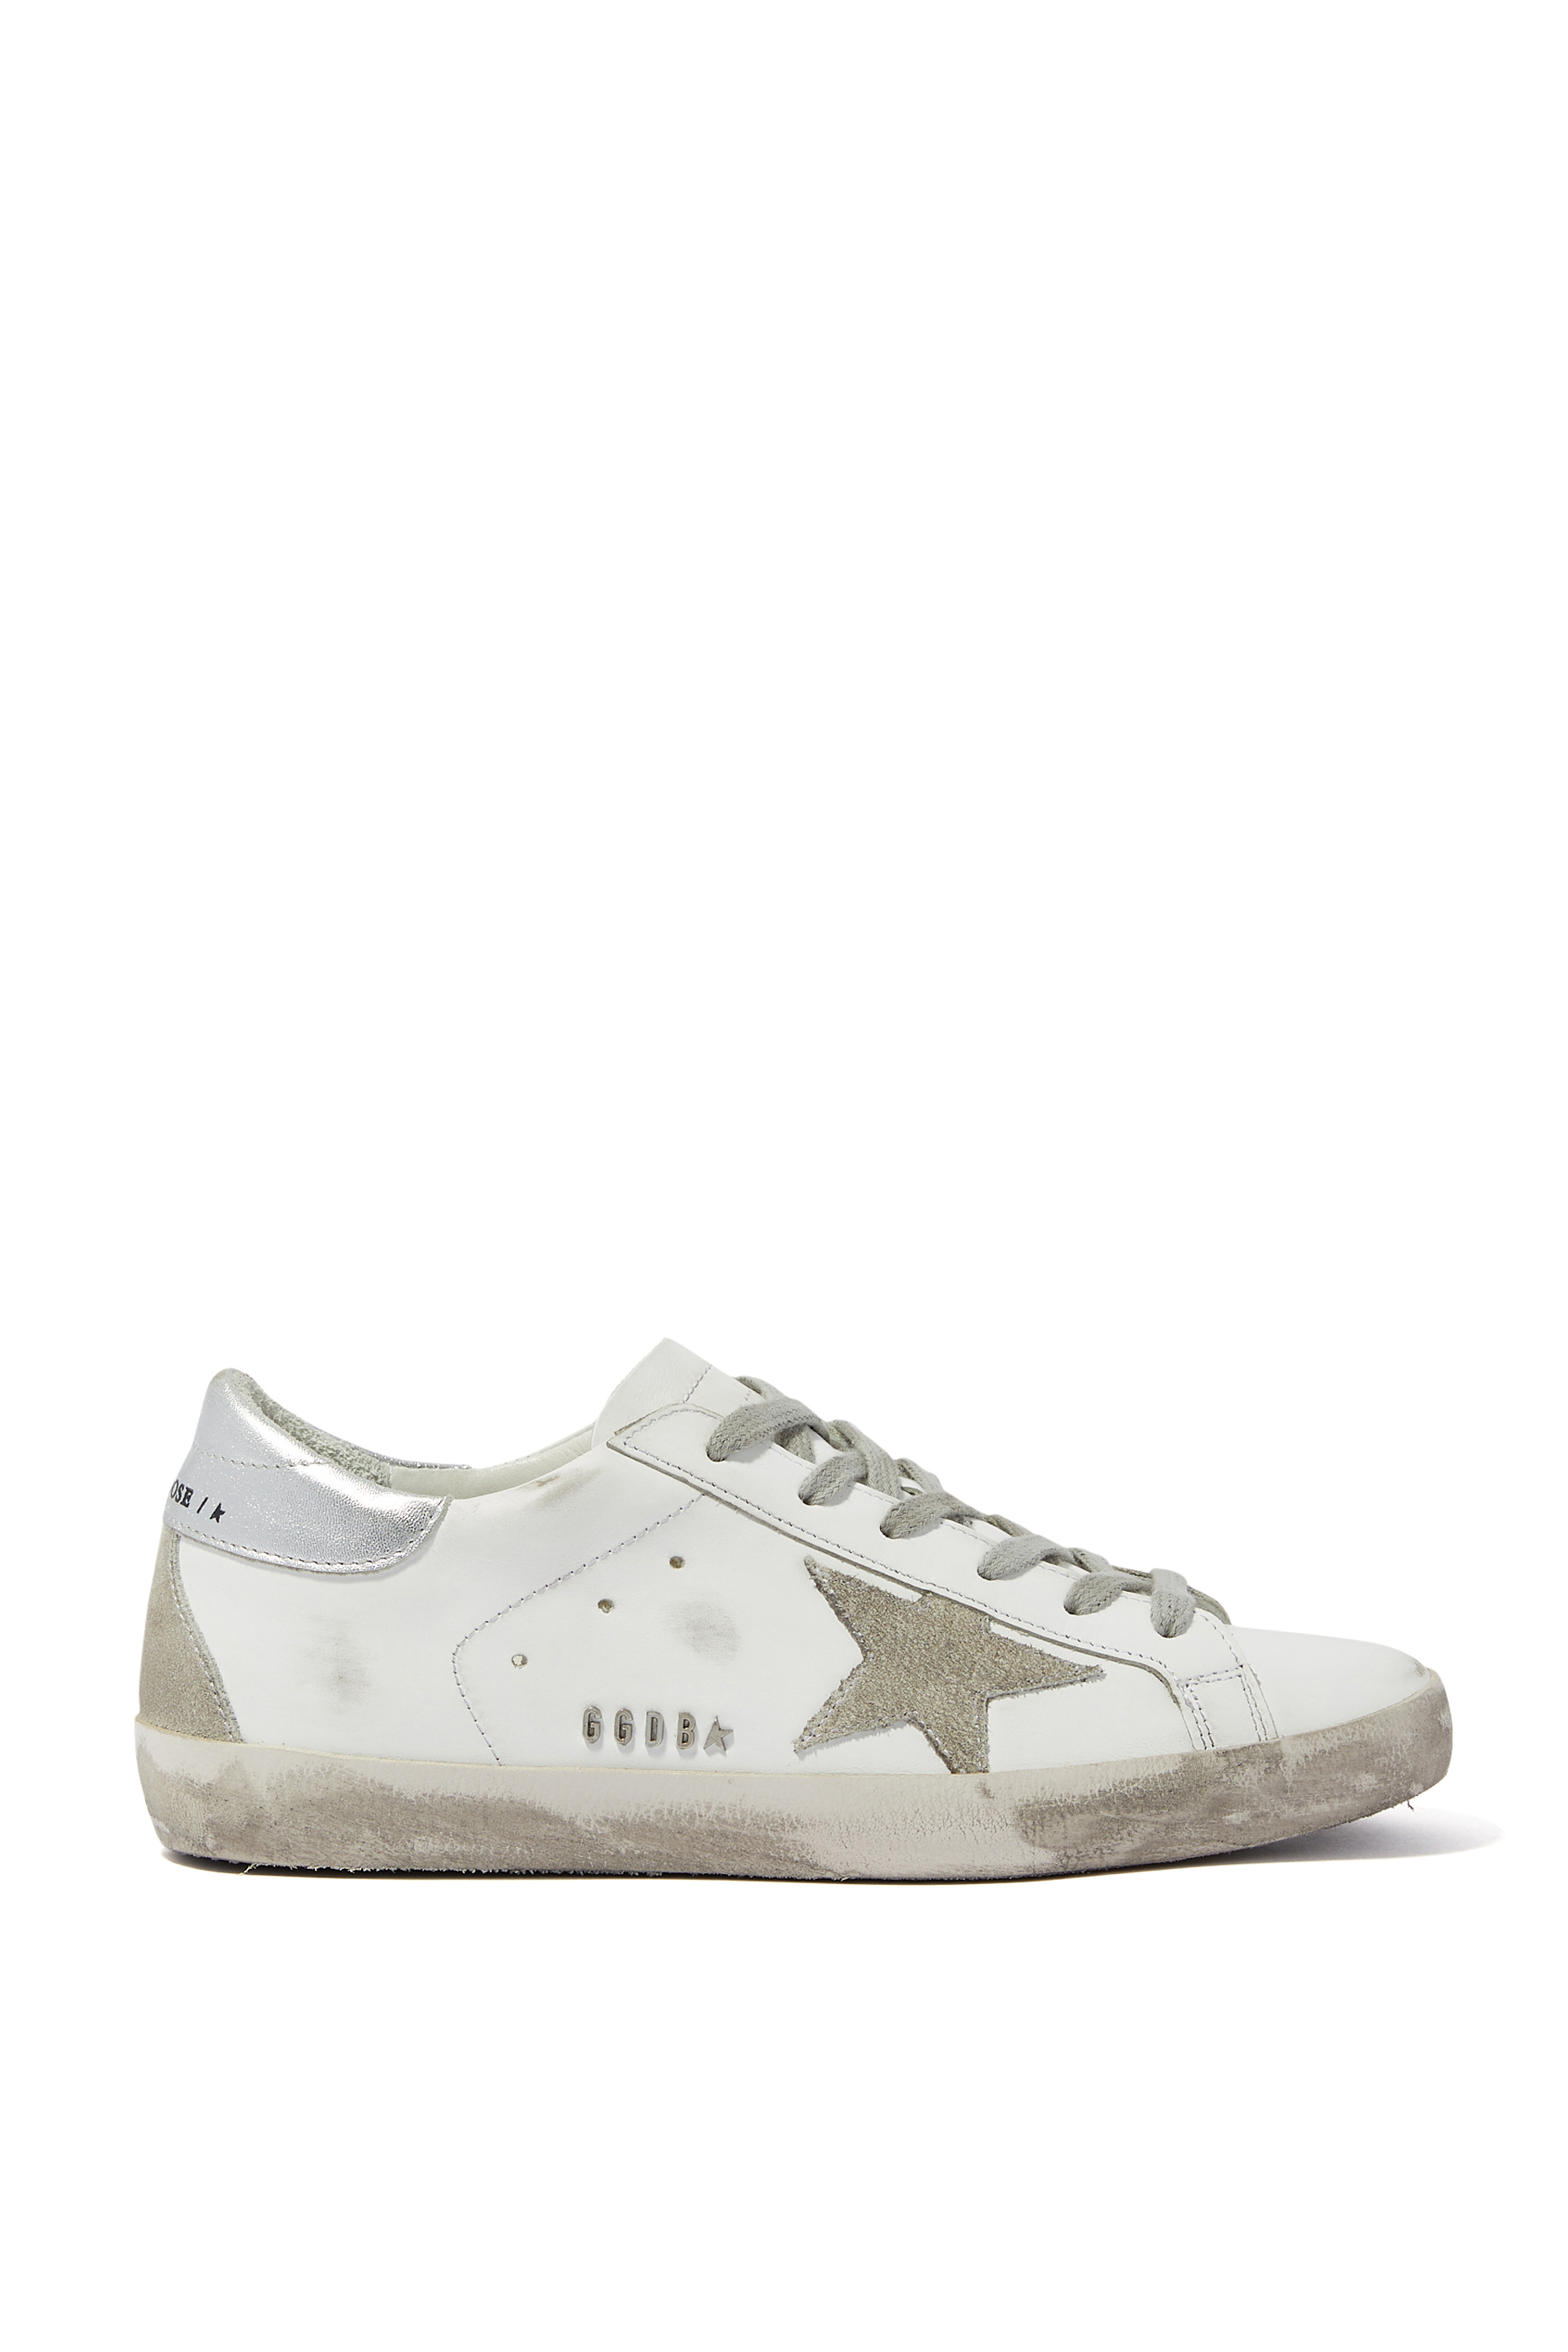 Buy Golden Goose Suede Star Superstar Sneakers - Womens for AED 1830.00 ...